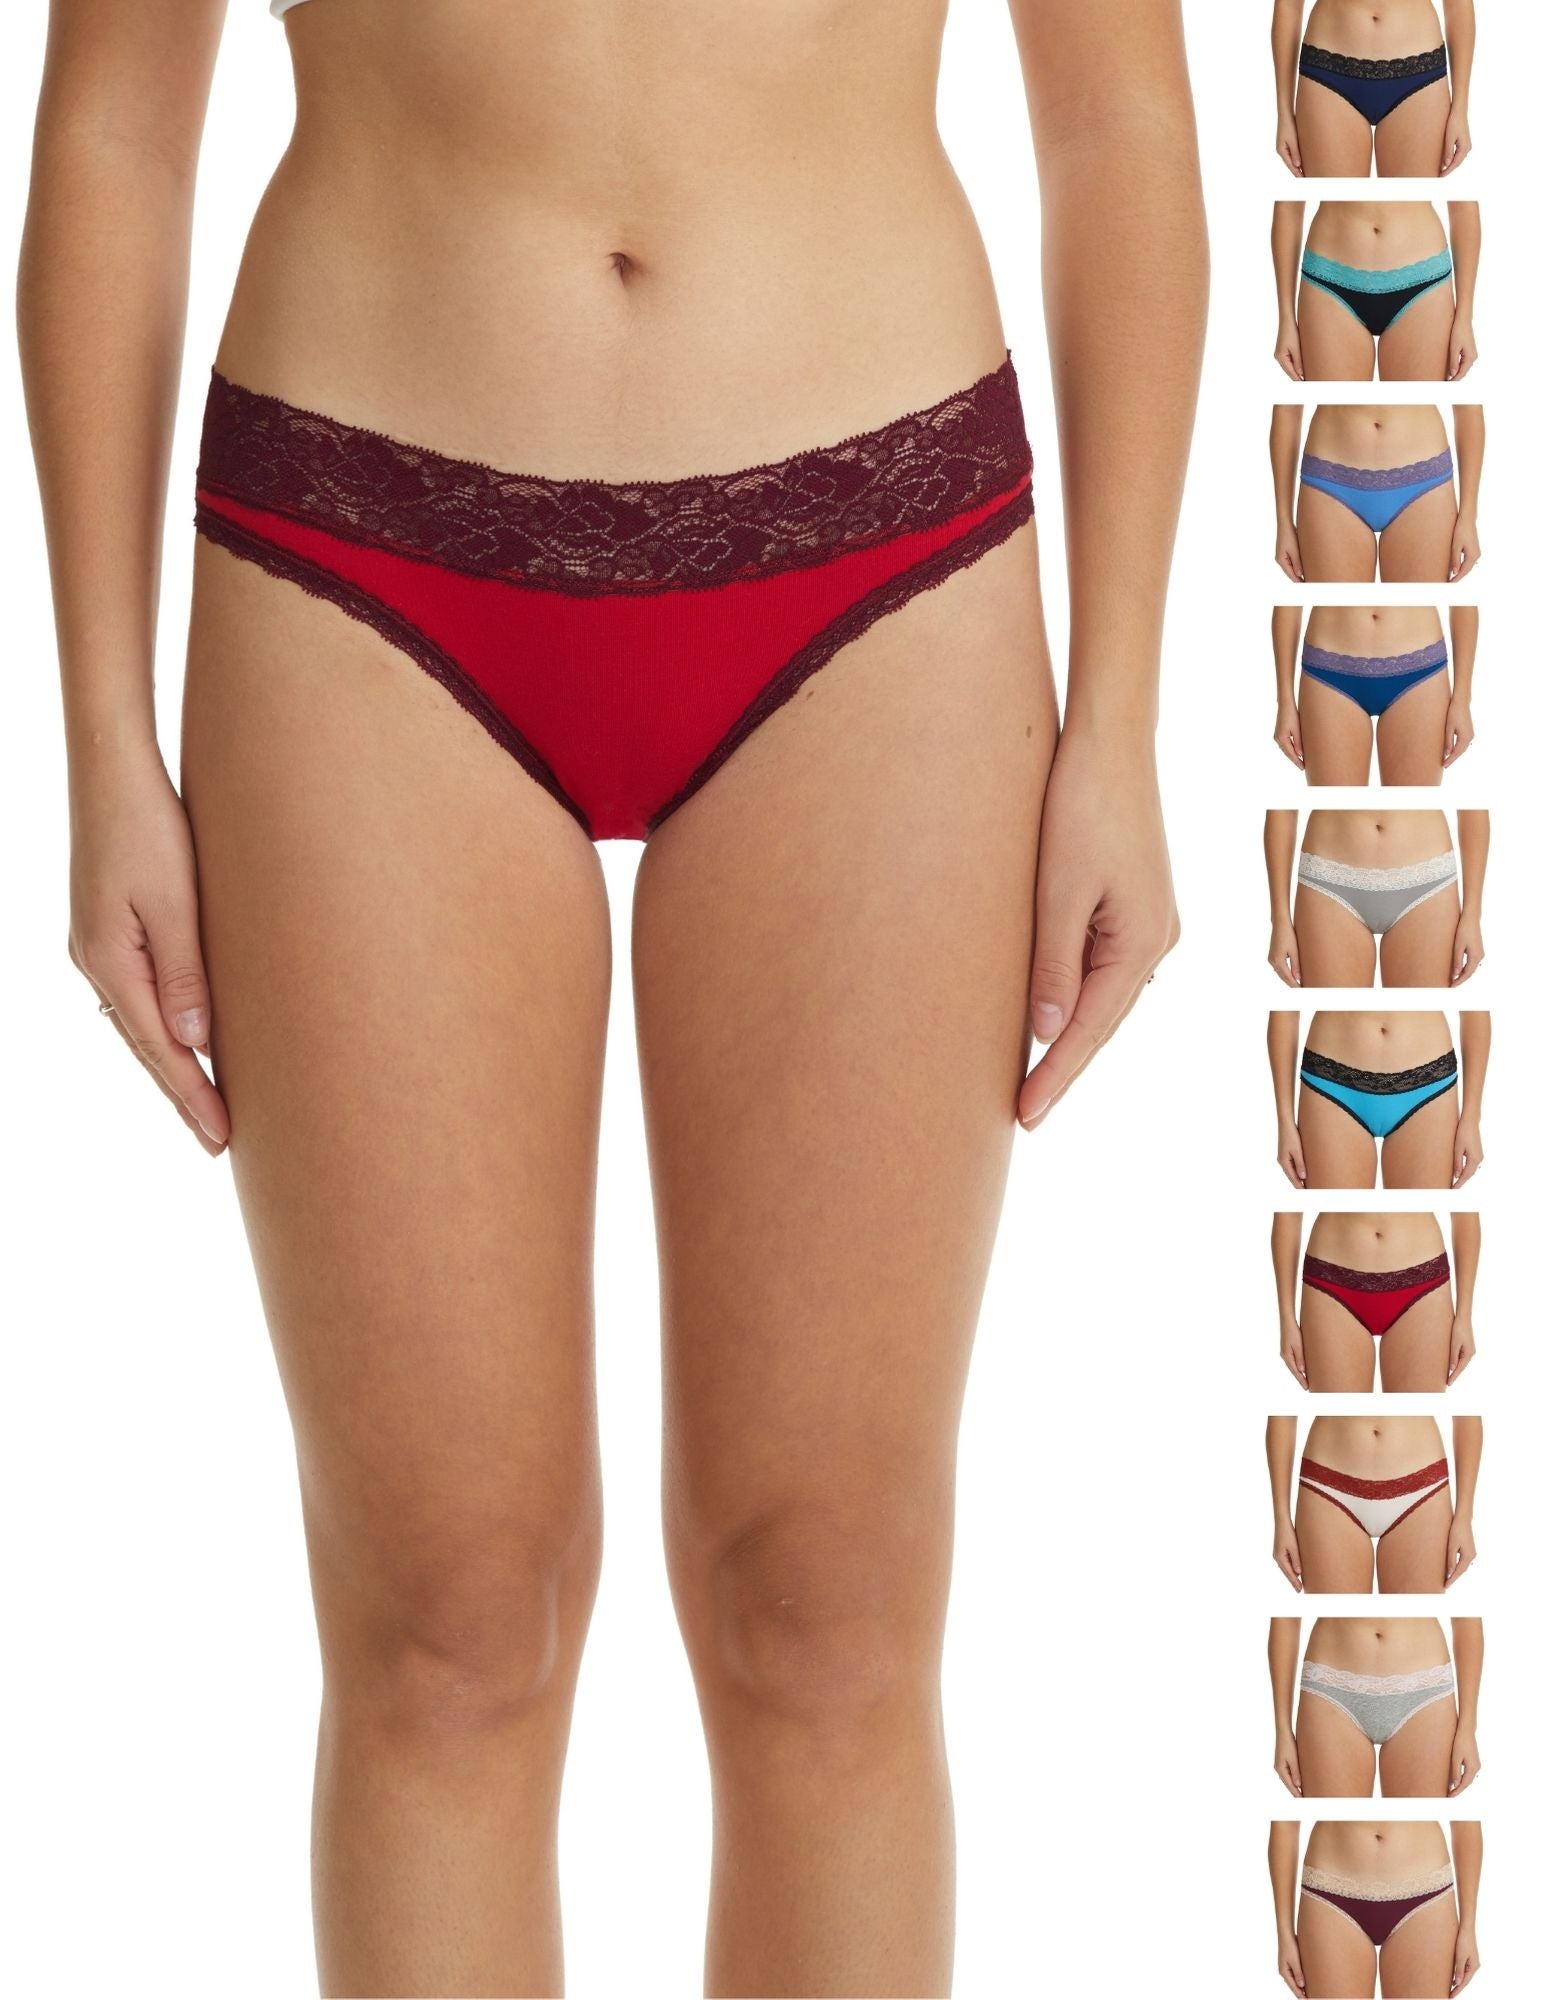 Cotton Bikini Panties with Lace Trim in Assorted Colors